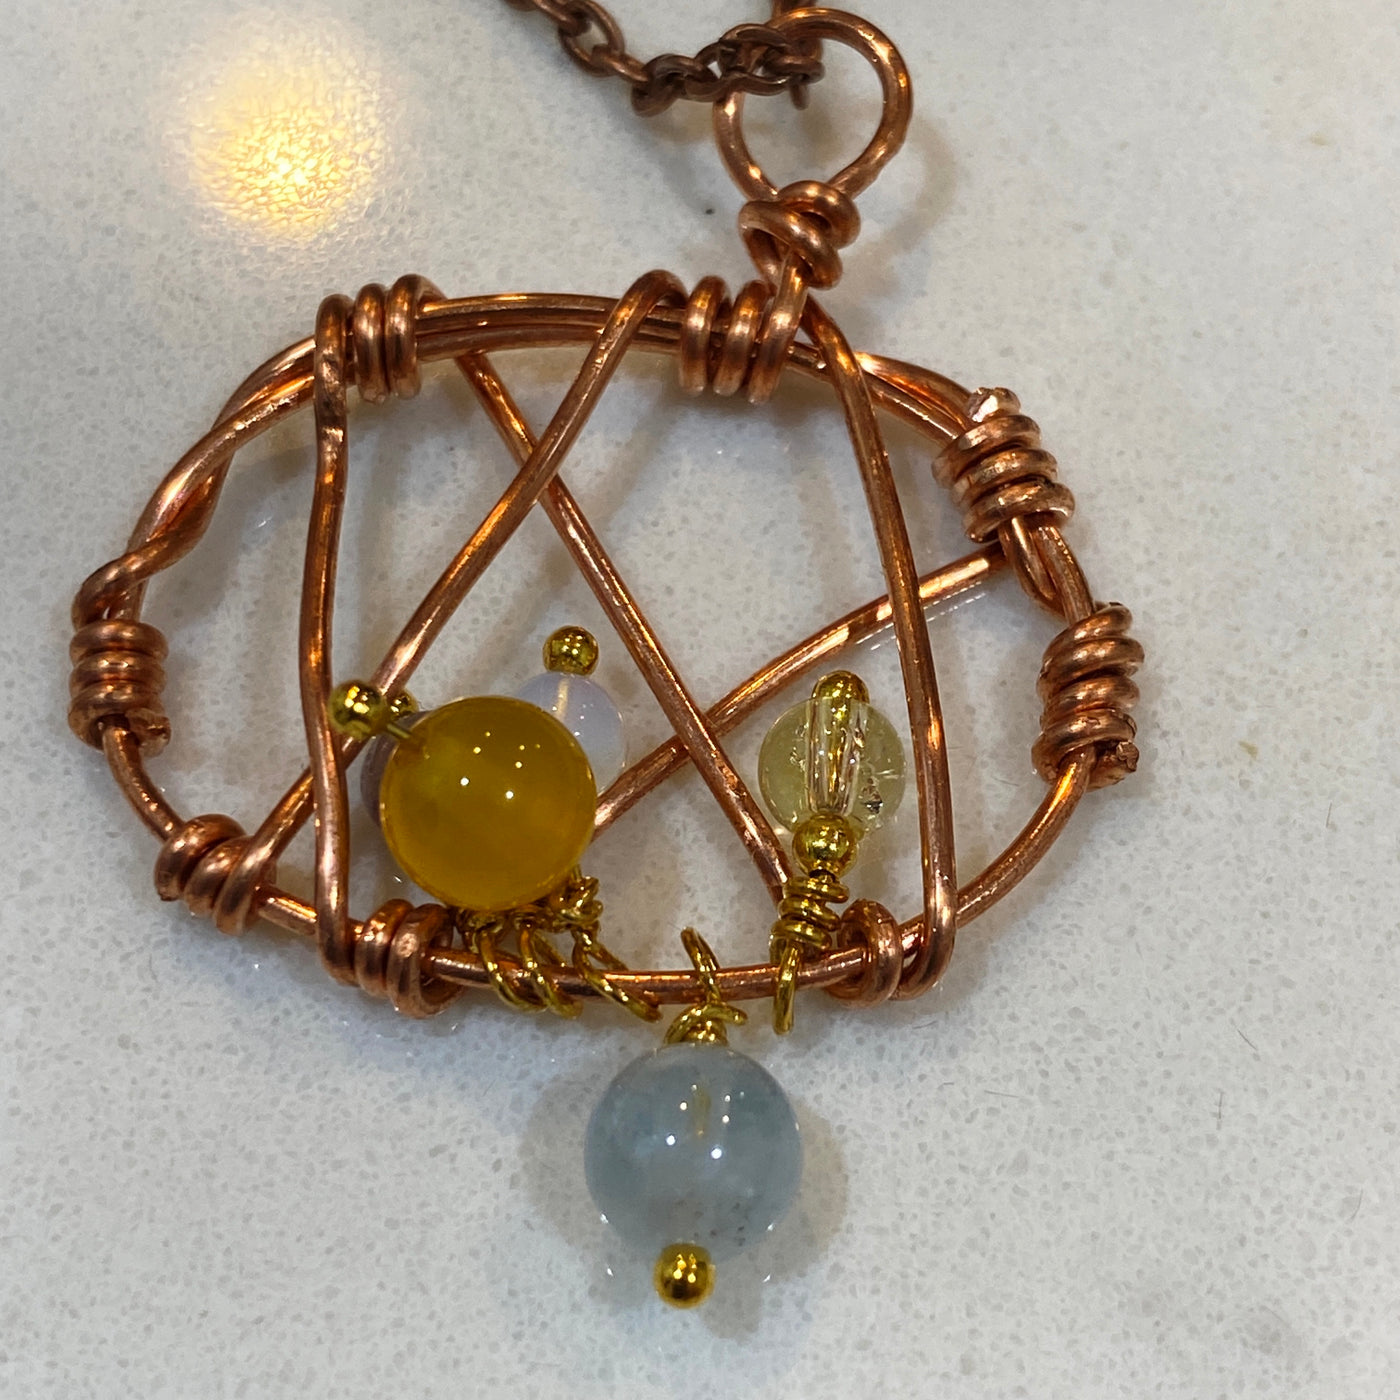 Yellow agate, acquamarine, opalyte, citrina, and amethyst in wires pendant for Shake and Move.